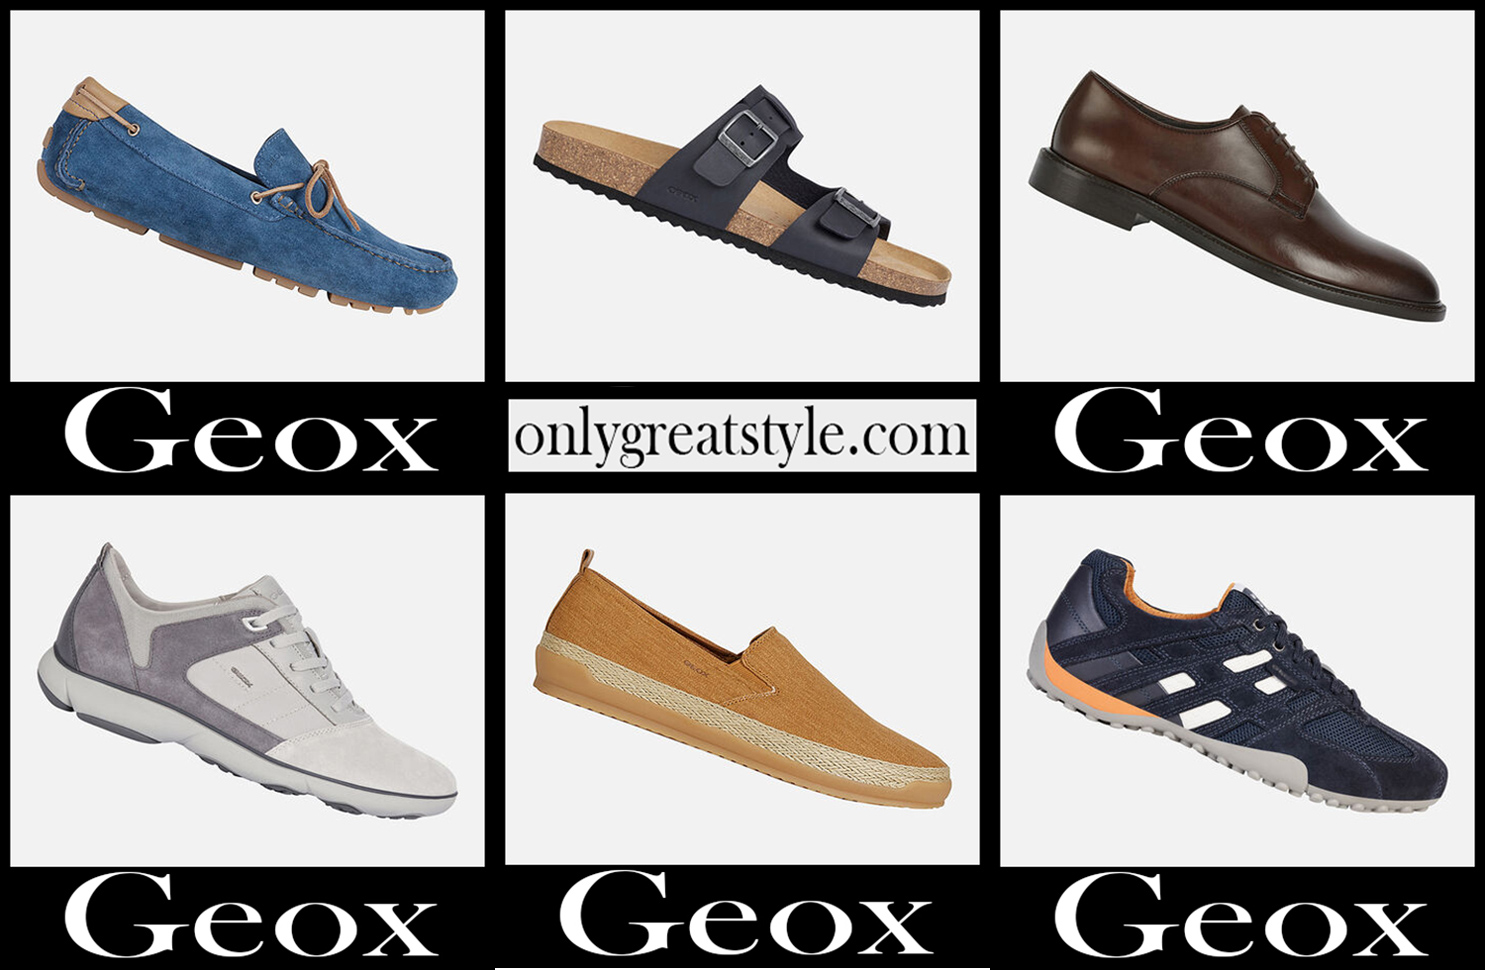 Geox shoes 2021 new arrivals mens footwear style